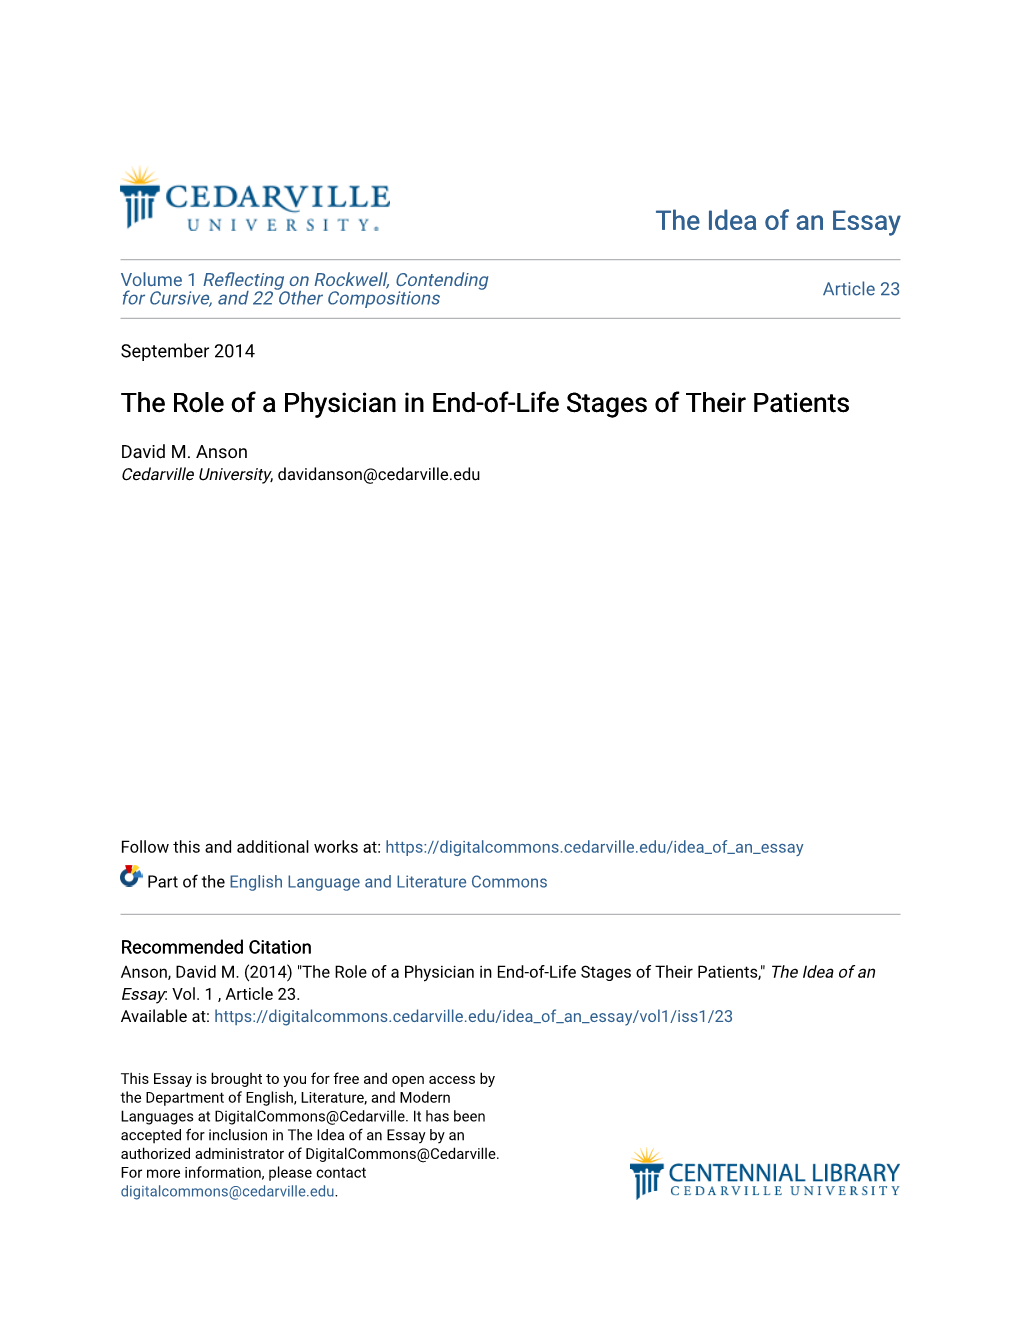 The Role of a Physician in End-Of-Life Stages of Their Patients